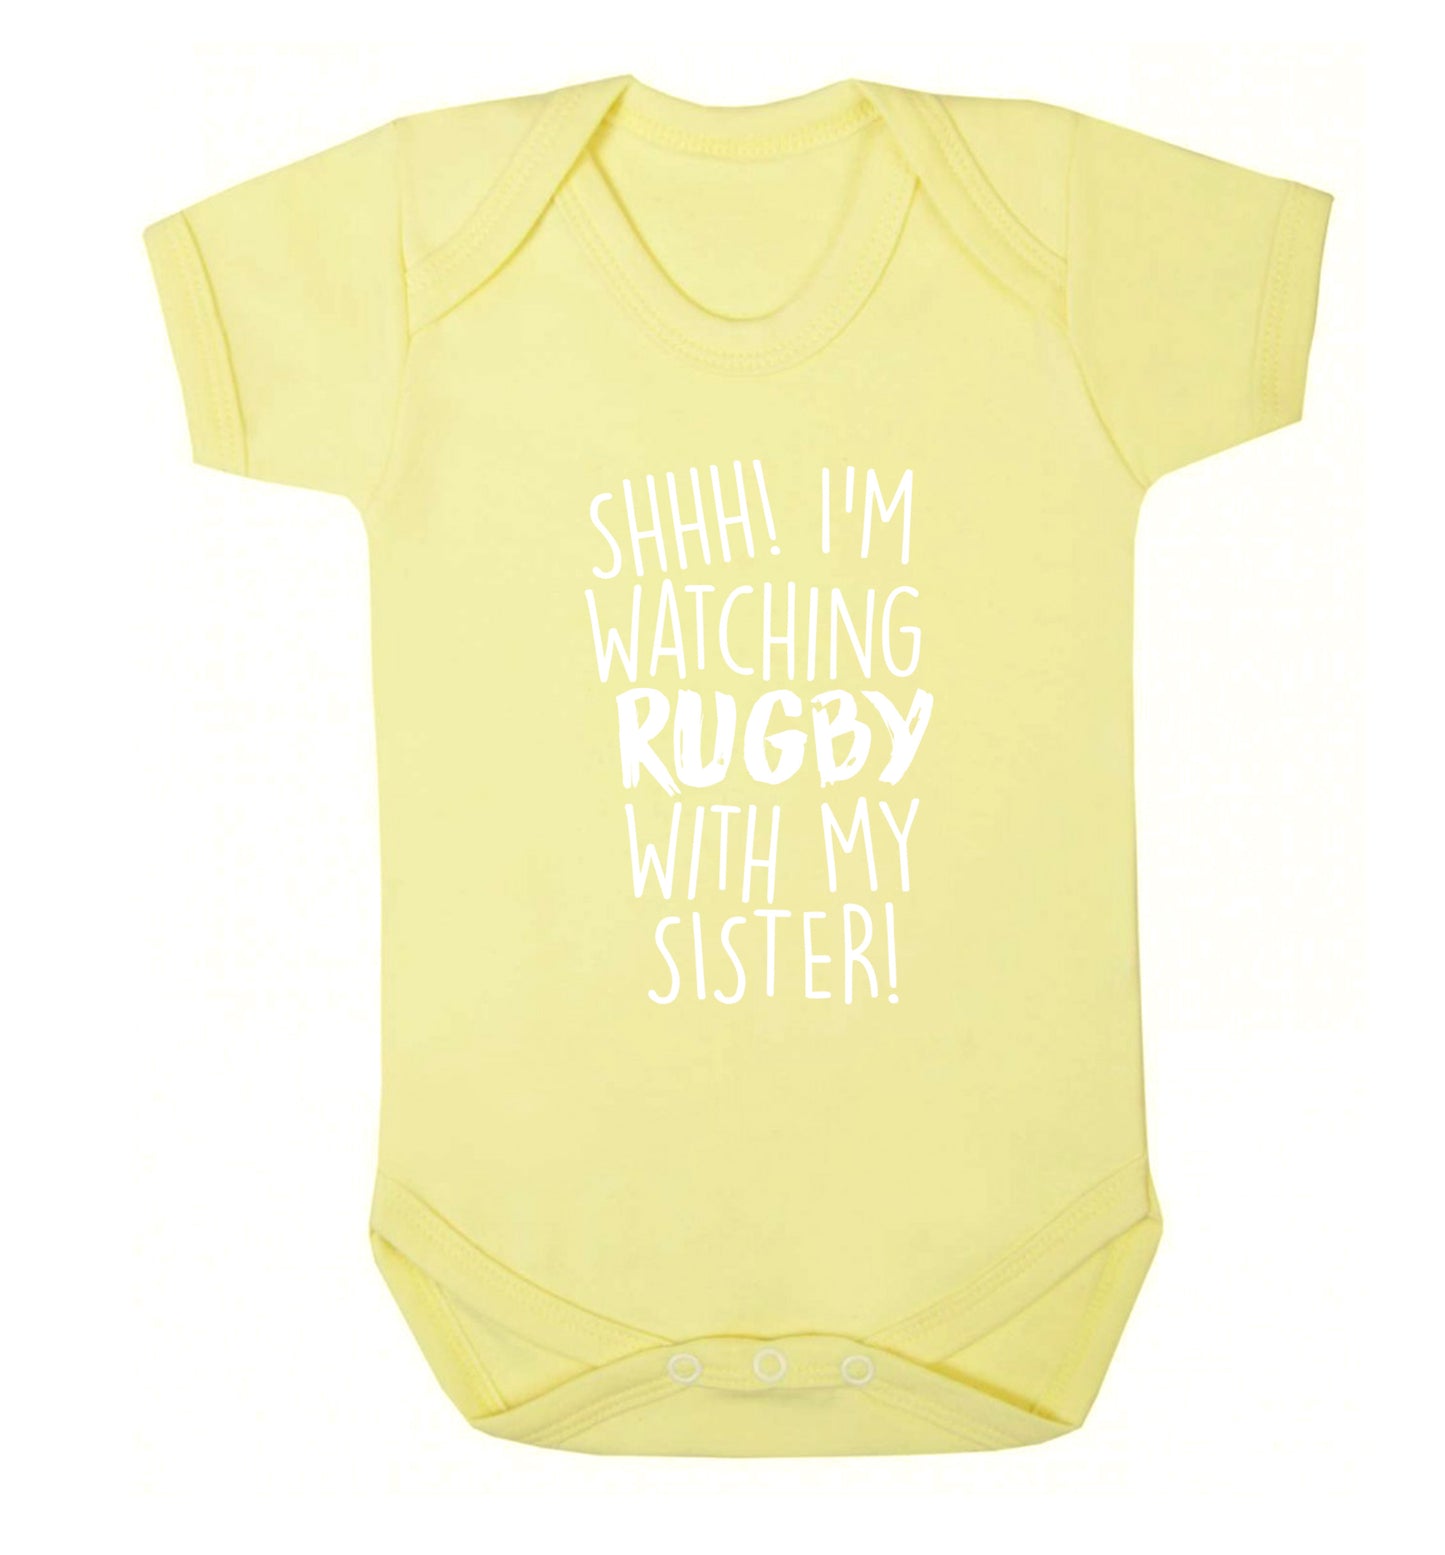 Shh... I'm watching rugby with my sister Baby Vest pale yellow 18-24 months